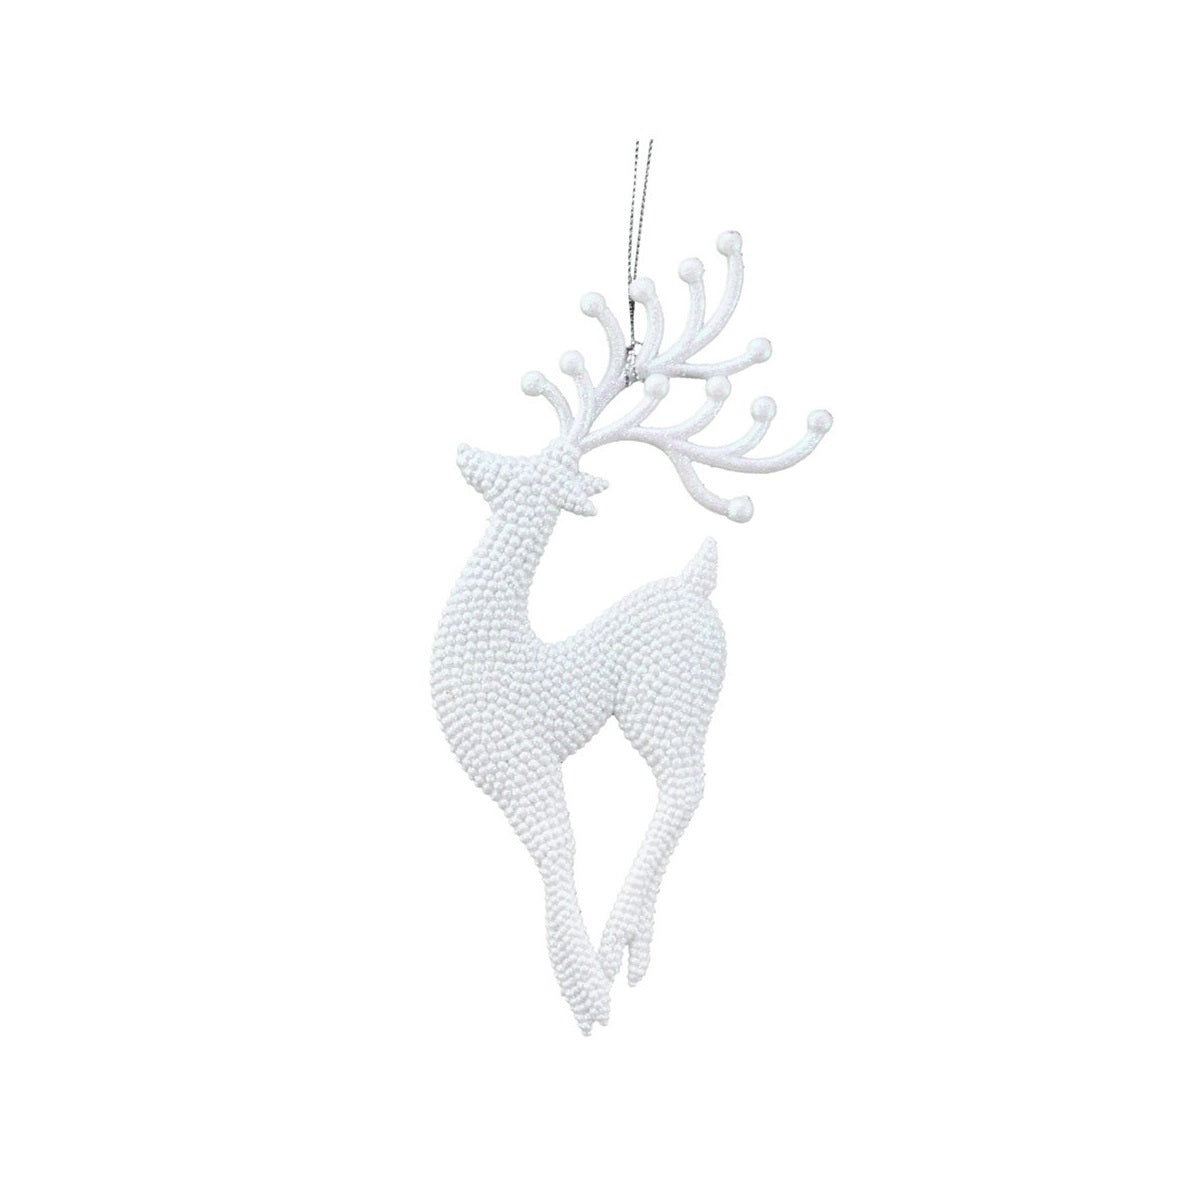 Gisela Graham White Glitter Reindeer Christmas Hanging Decoration - Prancing  Browse our beautiful range of luxury Christmas tree decorations and ornaments for your tree this Christmas.  Add style to your Christmas tree with this elegant white glitter reindeer hanging ornament.